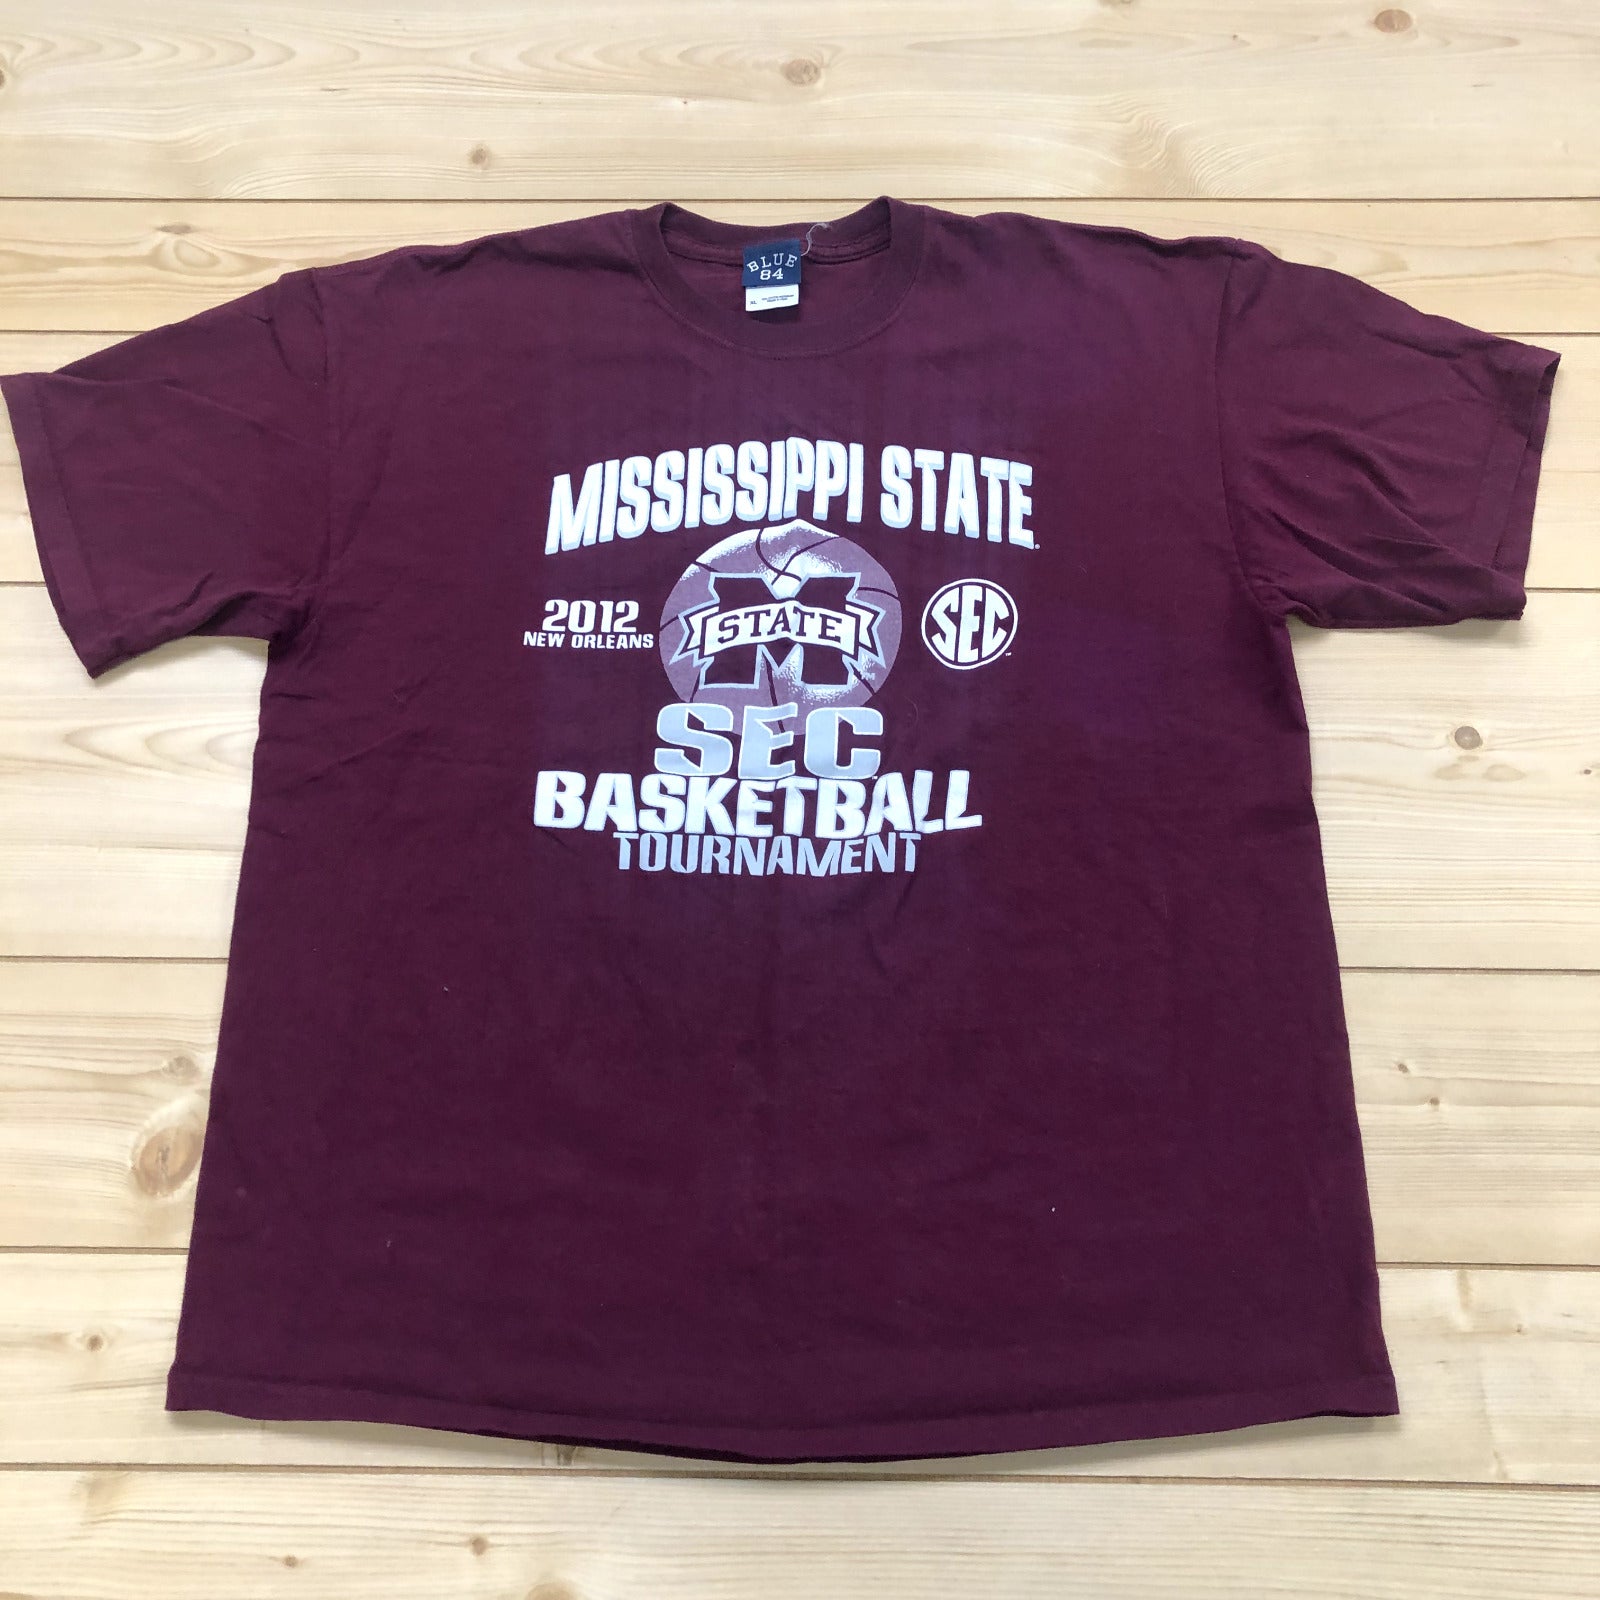 Blue 84 Maroon Mississippi State 2012 Basketball Tournament T-Shirt Size XL